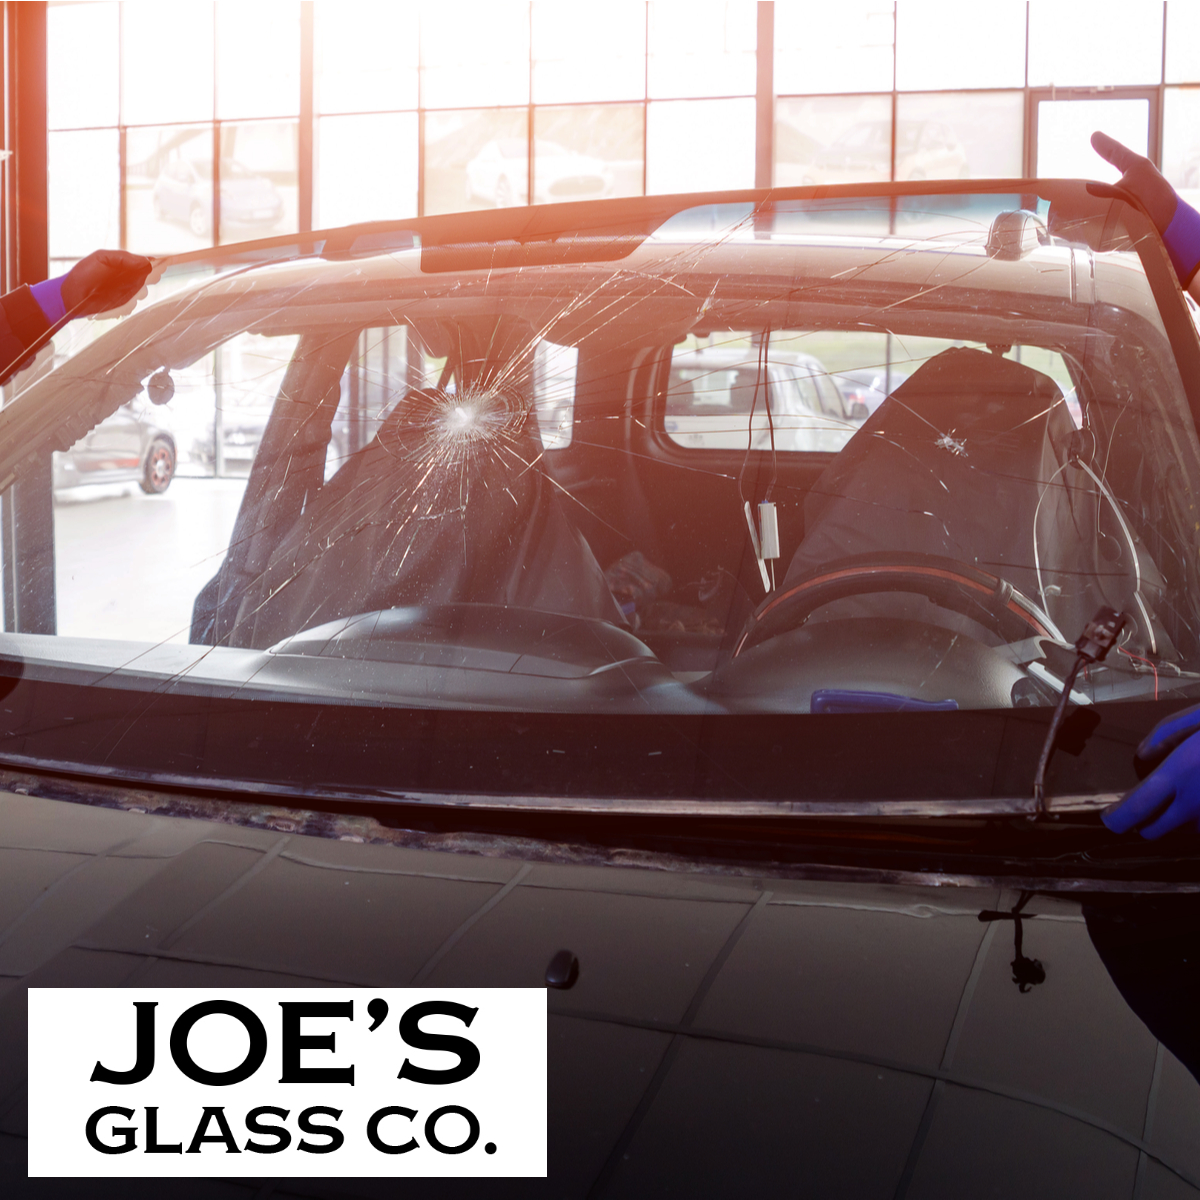 Windshield Replacement In Snohomish When And Where You Need It!